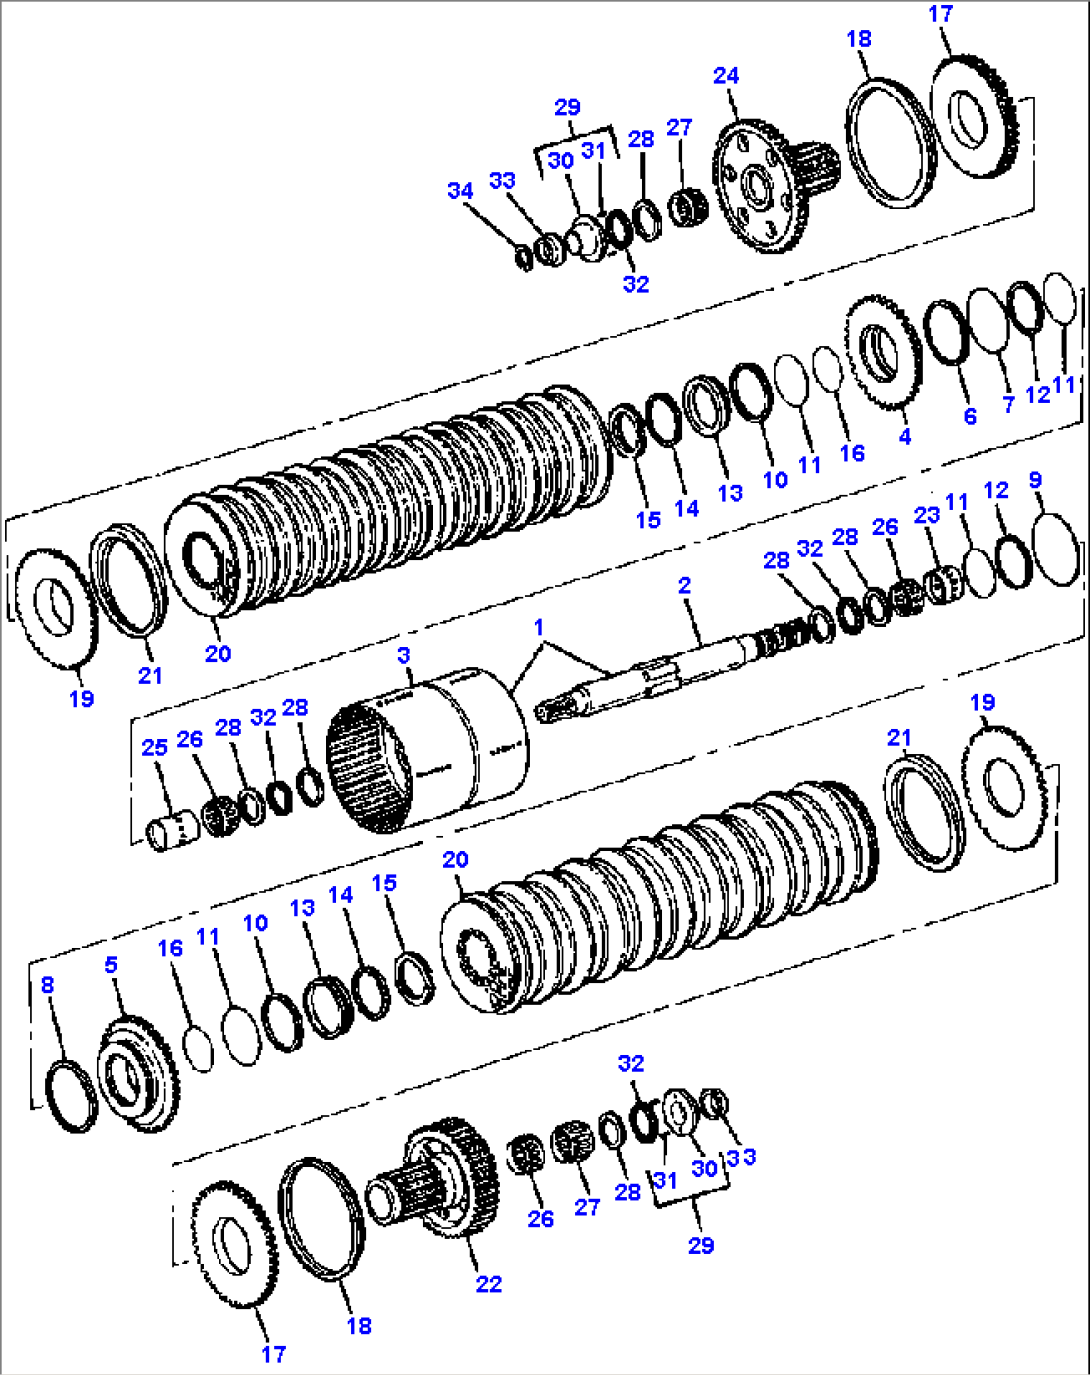 TRANSMISSION FORWARD AND REVERSE CLUTCH